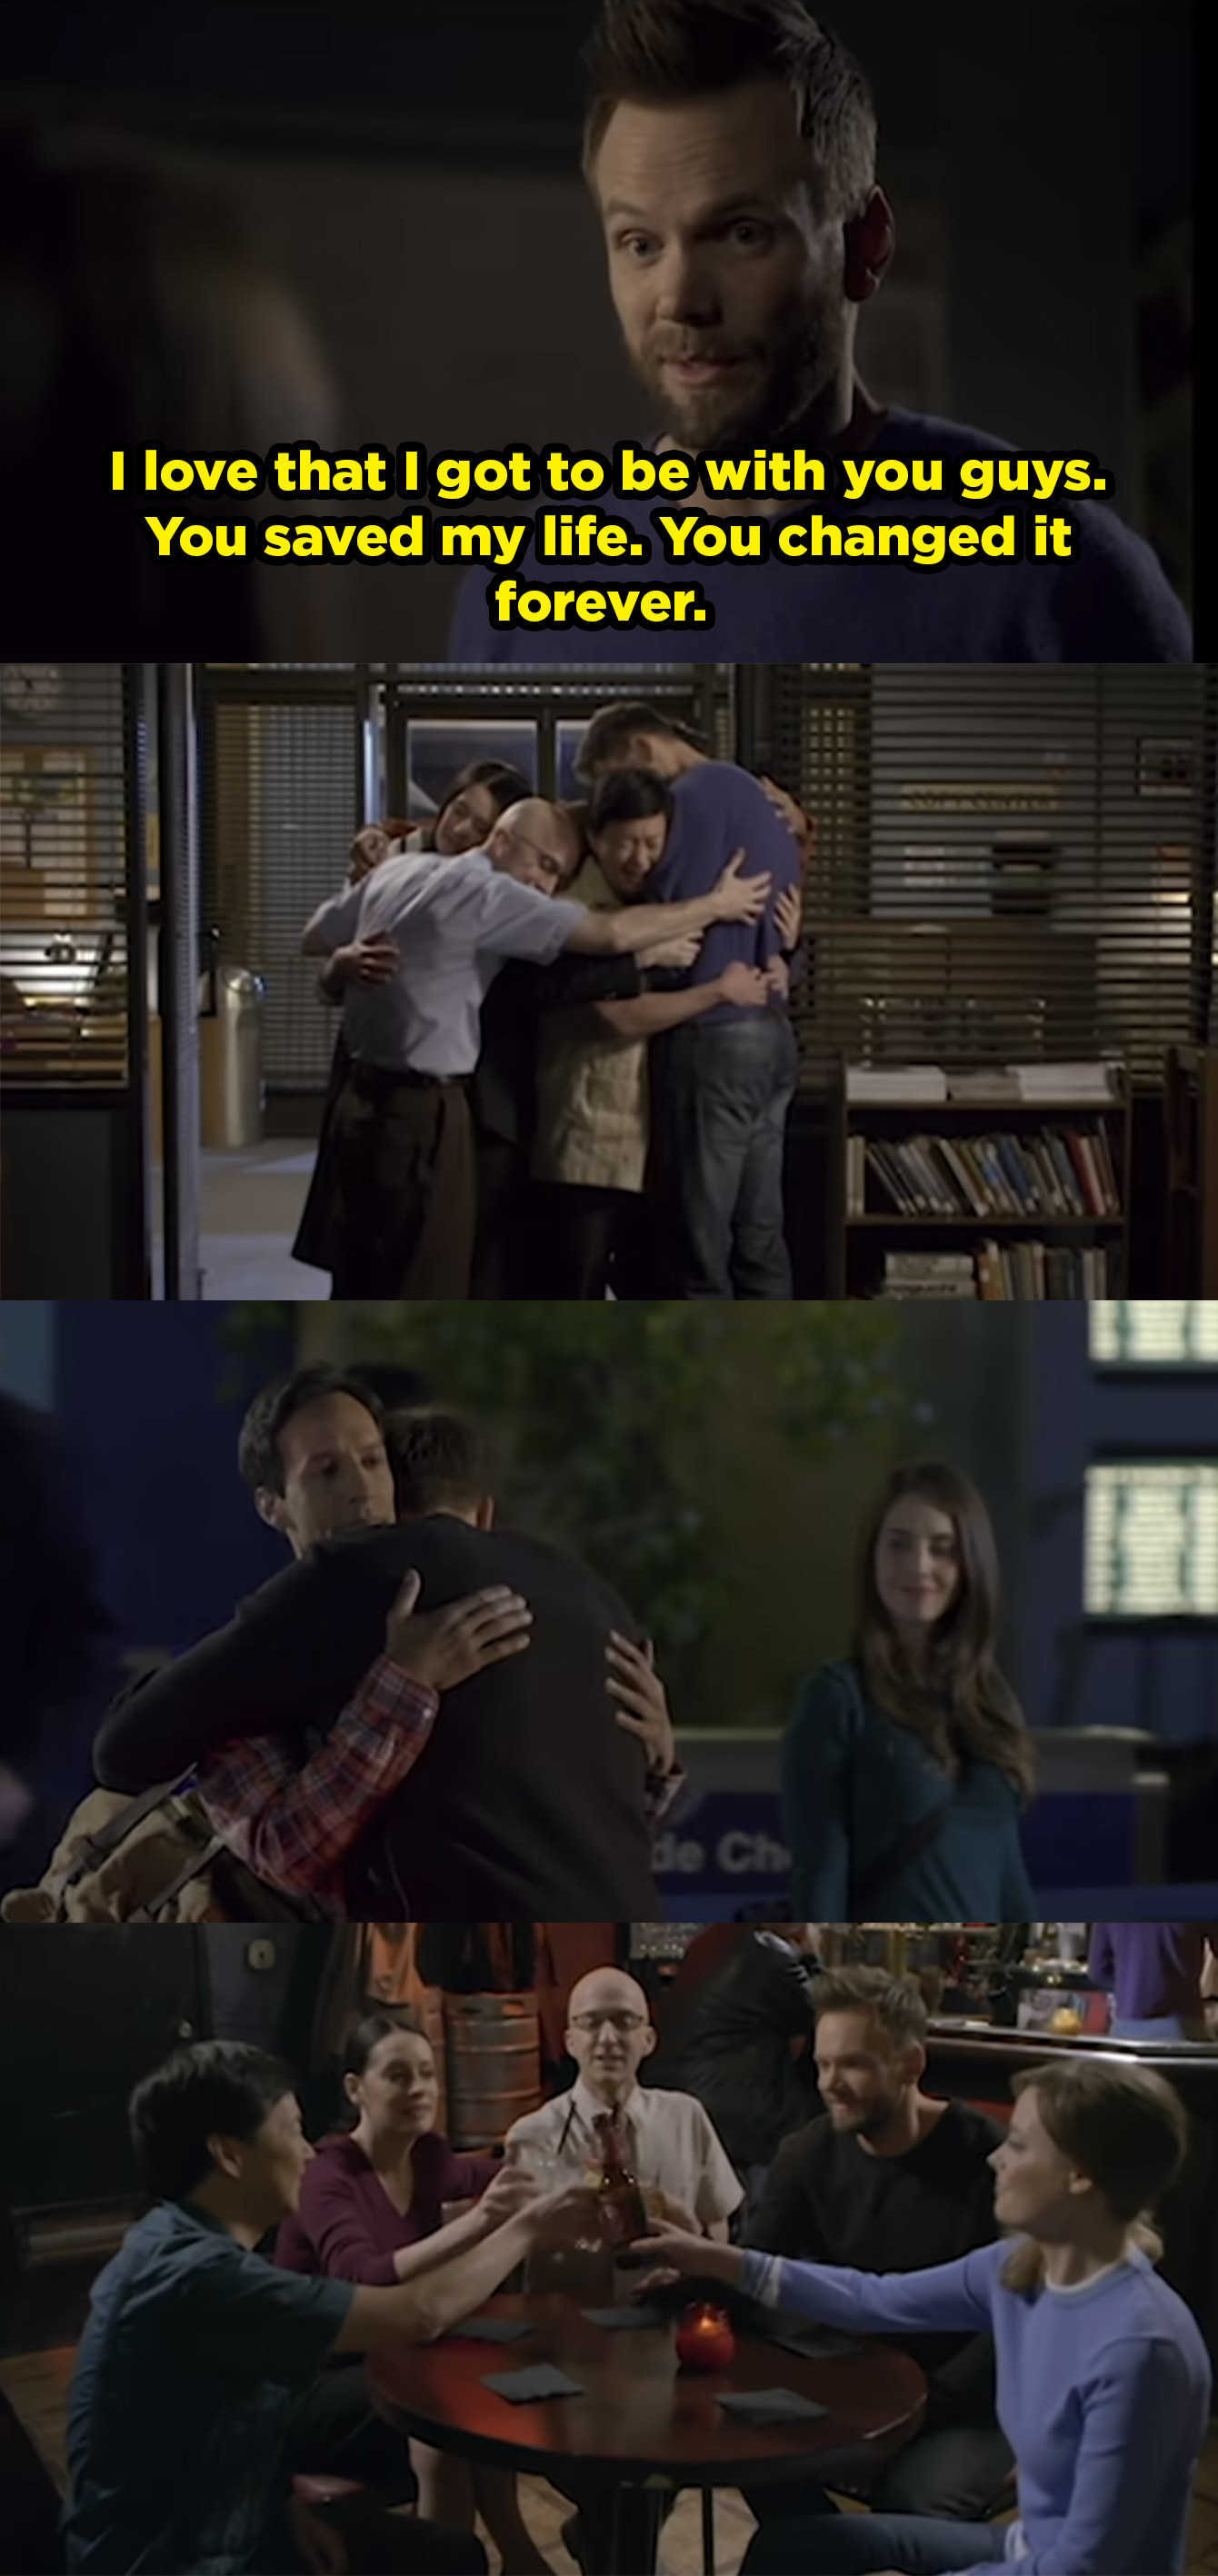 Jeff tells the study group that he&#x27;s so happy to have met them and they saved his life and changed him. Then he sends off Abed and Annie at the airport and sits down for drinks with Brita, Chang, Frankie, and Dean.